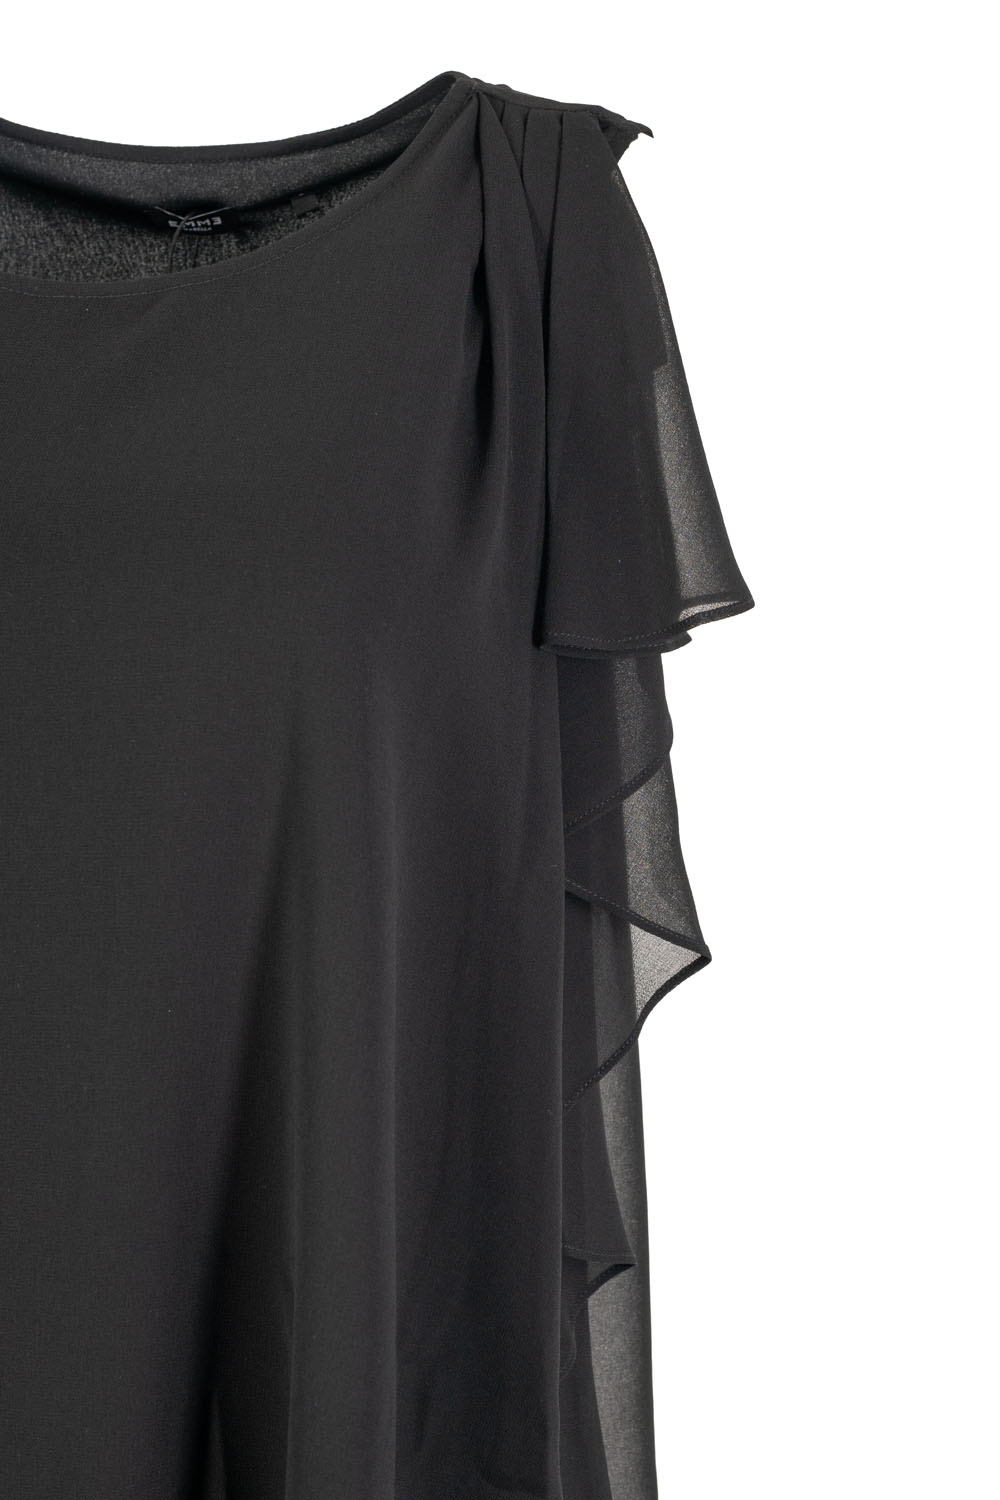 A-Line Blouse with Sheer Overlay and Side Flounce